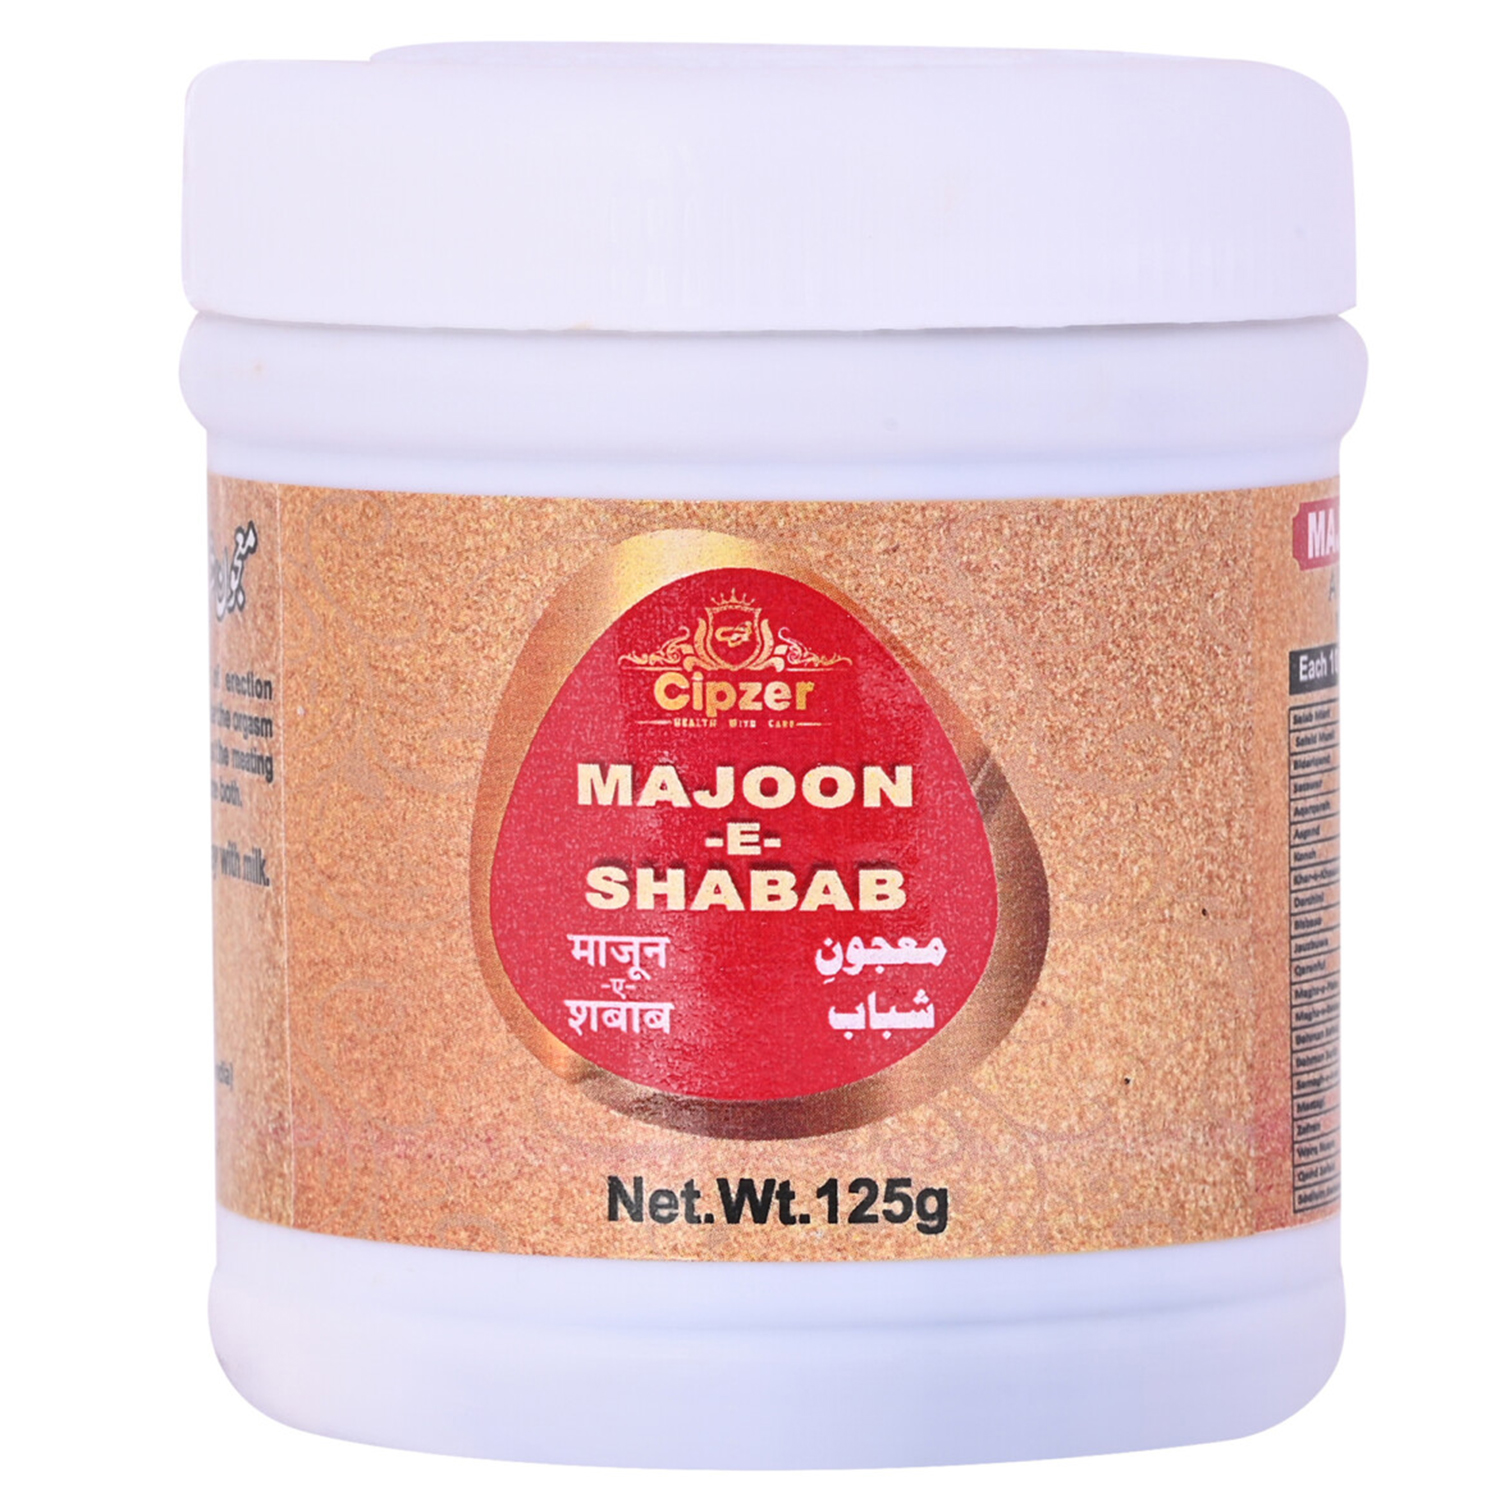 Buy Cipzer Majoon-e-Shabab at Best Price Online